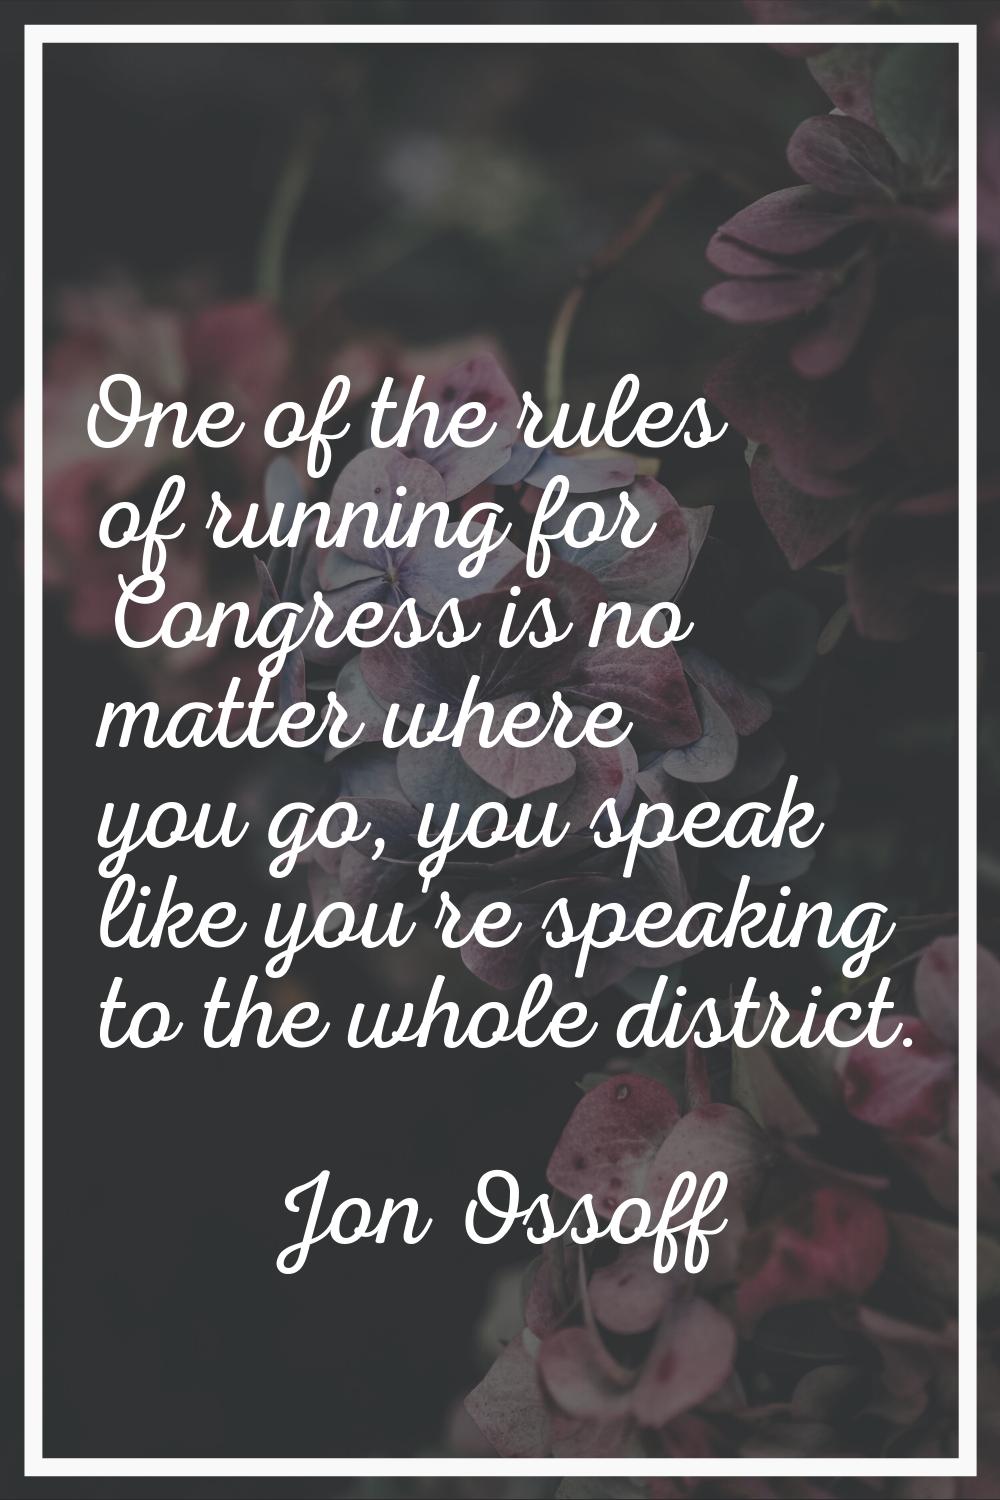 One of the rules of running for Congress is no matter where you go, you speak like you're speaking 